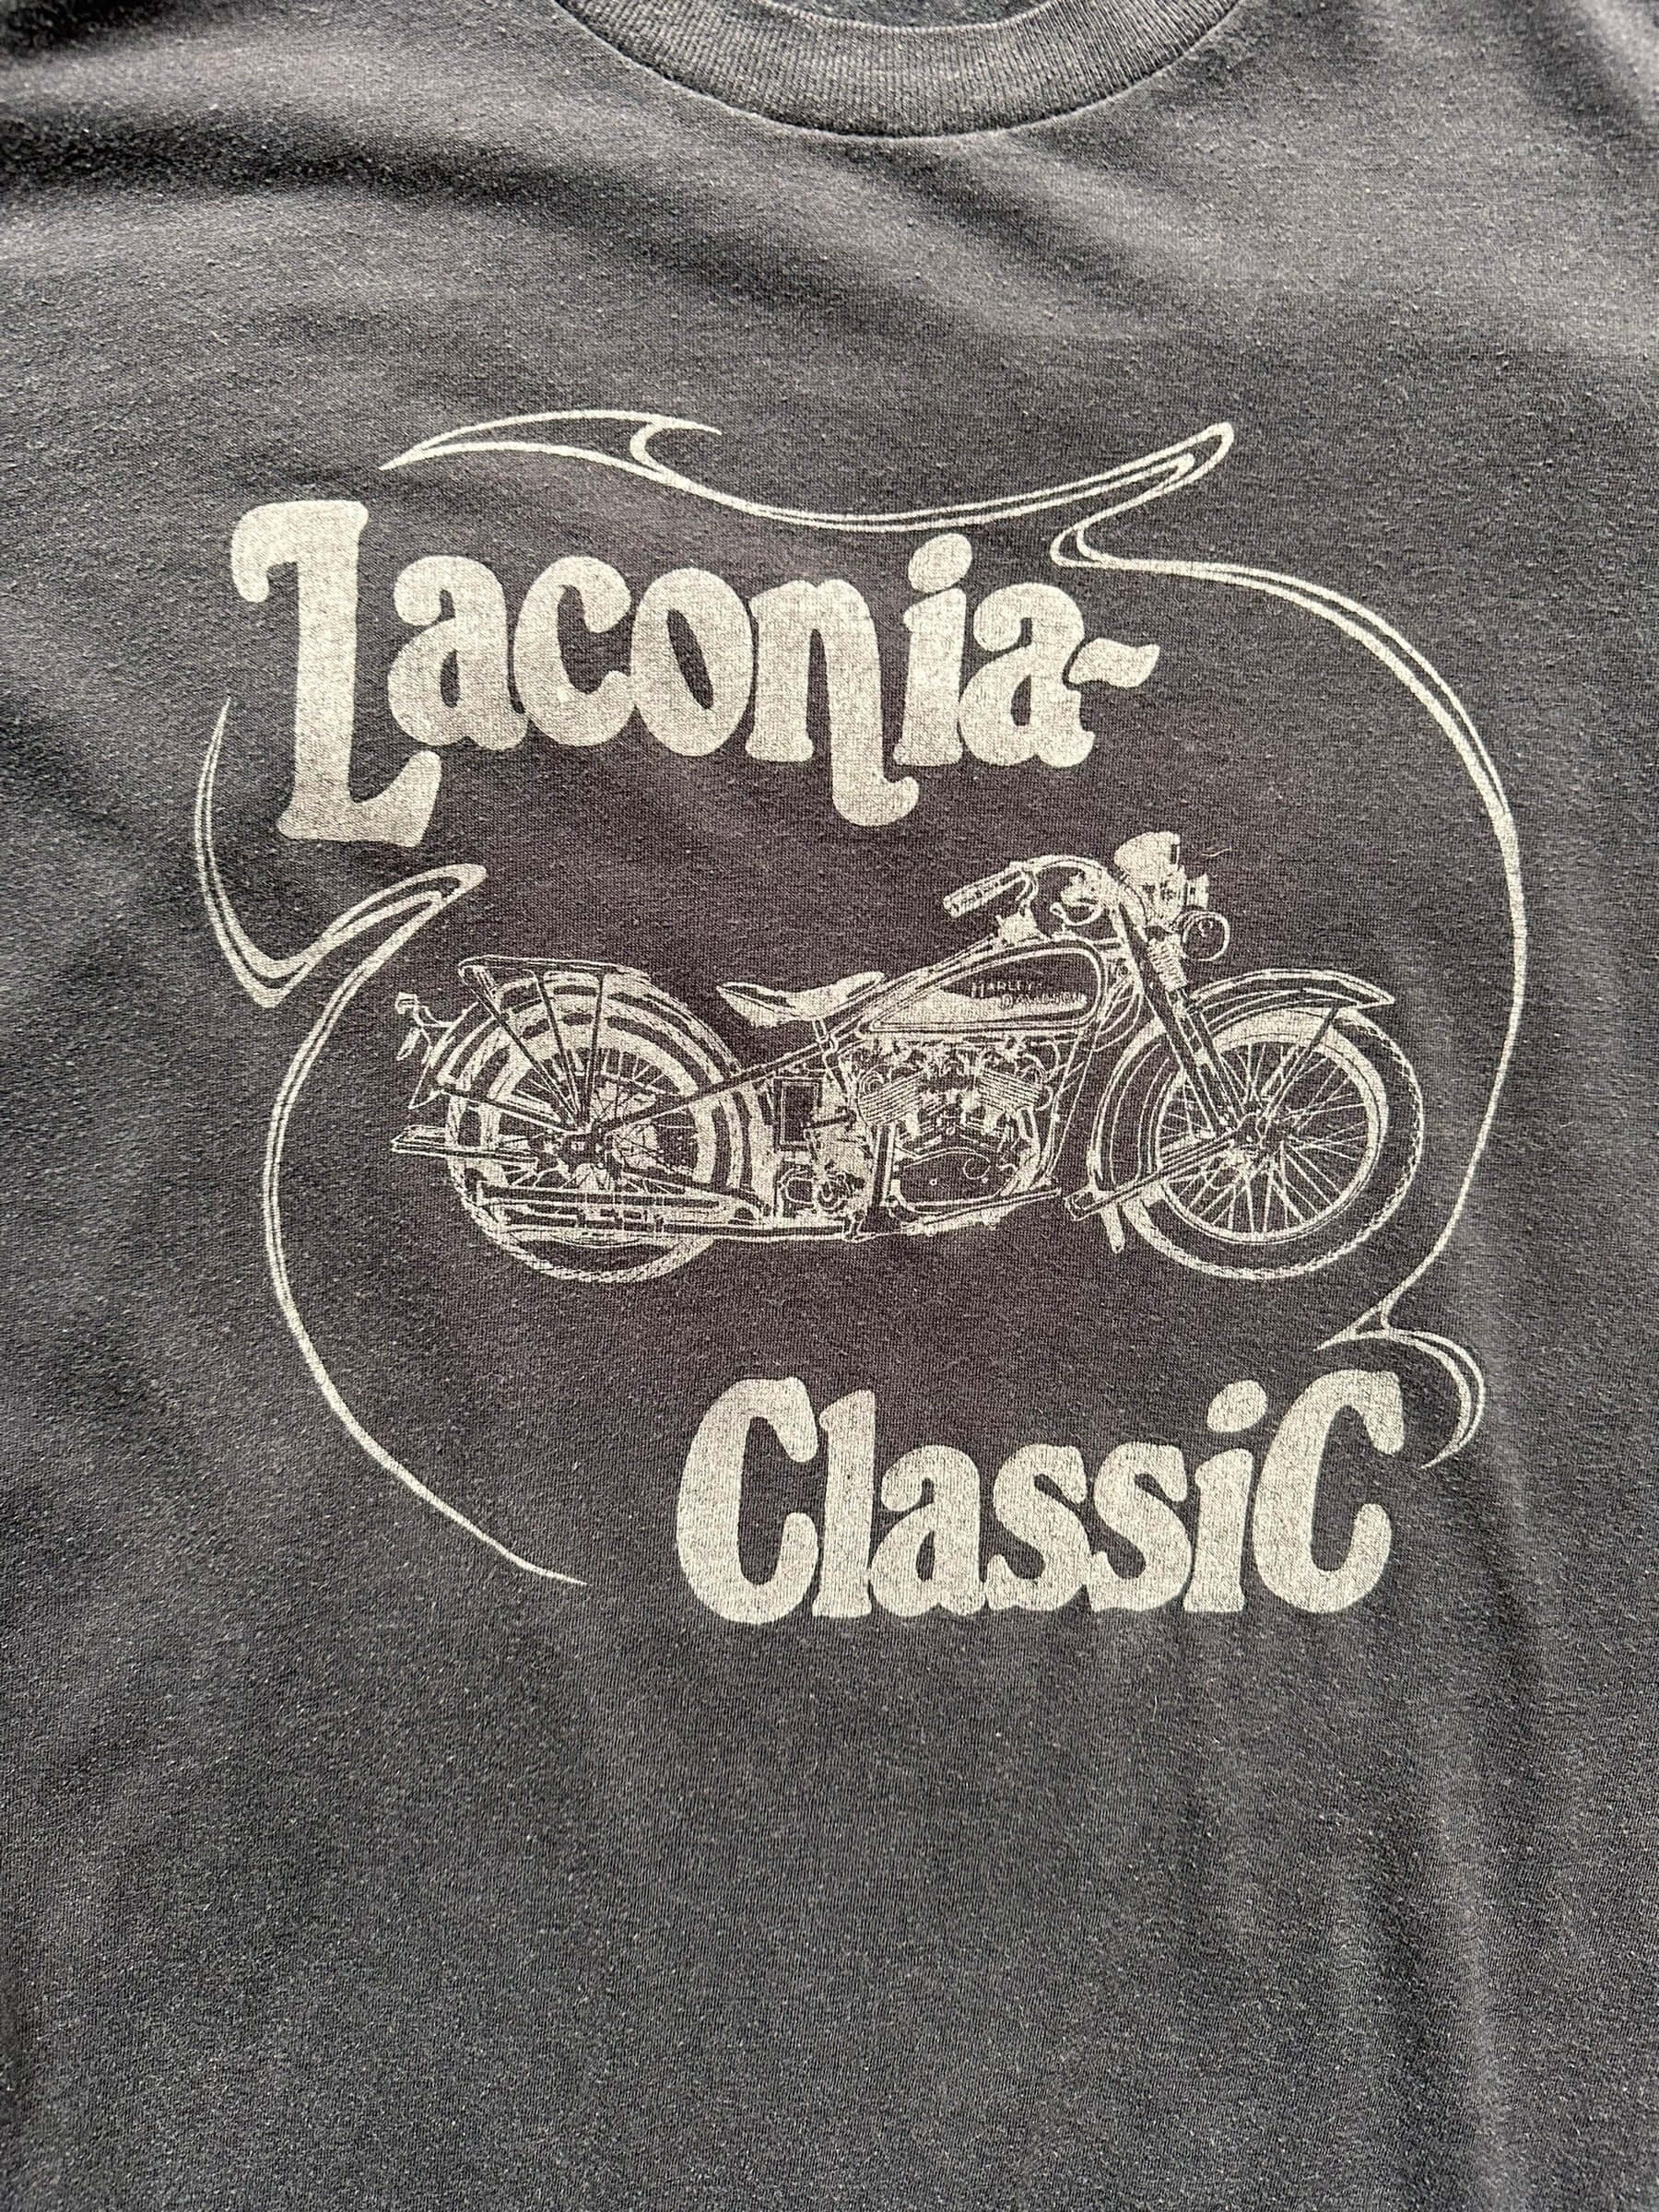 Graphic Detail on Front of Vintage Laconia Motorcycle Classic Tee SZ L | Vintage Harley Tee Seattle